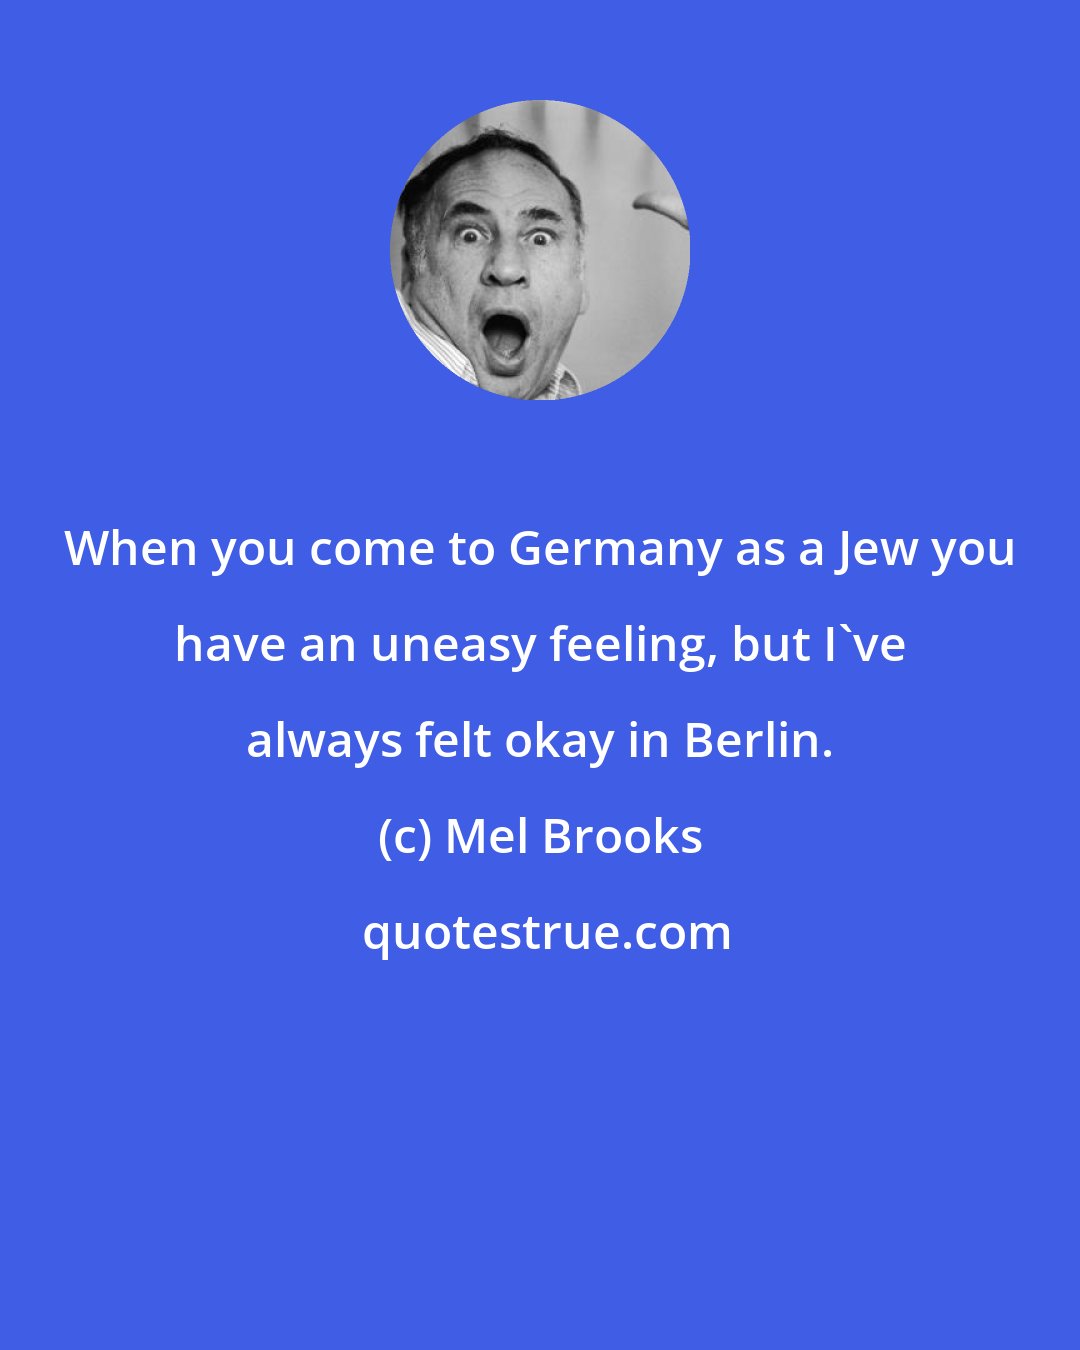 Mel Brooks: When you come to Germany as a Jew you have an uneasy feeling, but I've always felt okay in Berlin.